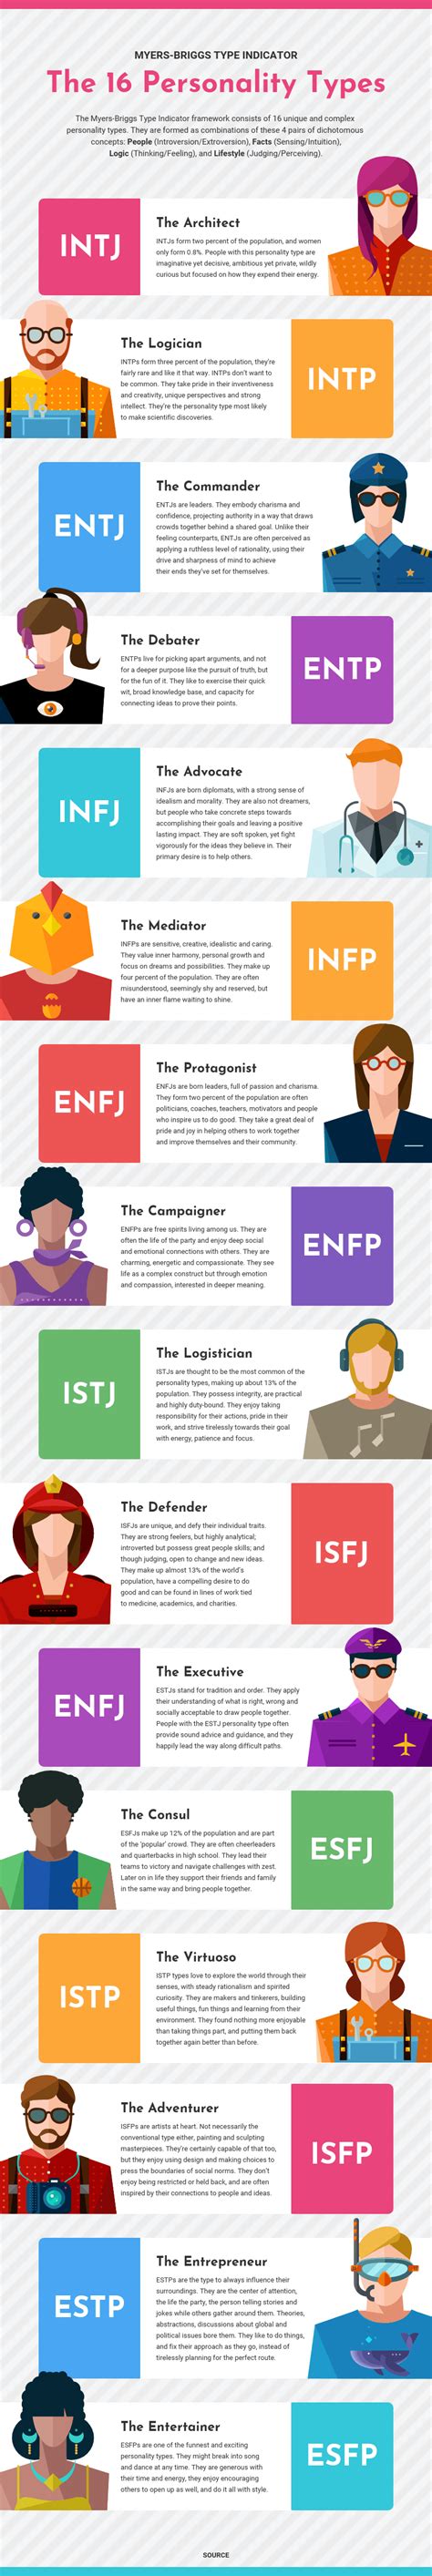 Myers Briggs Personality Types Infographic Venngage